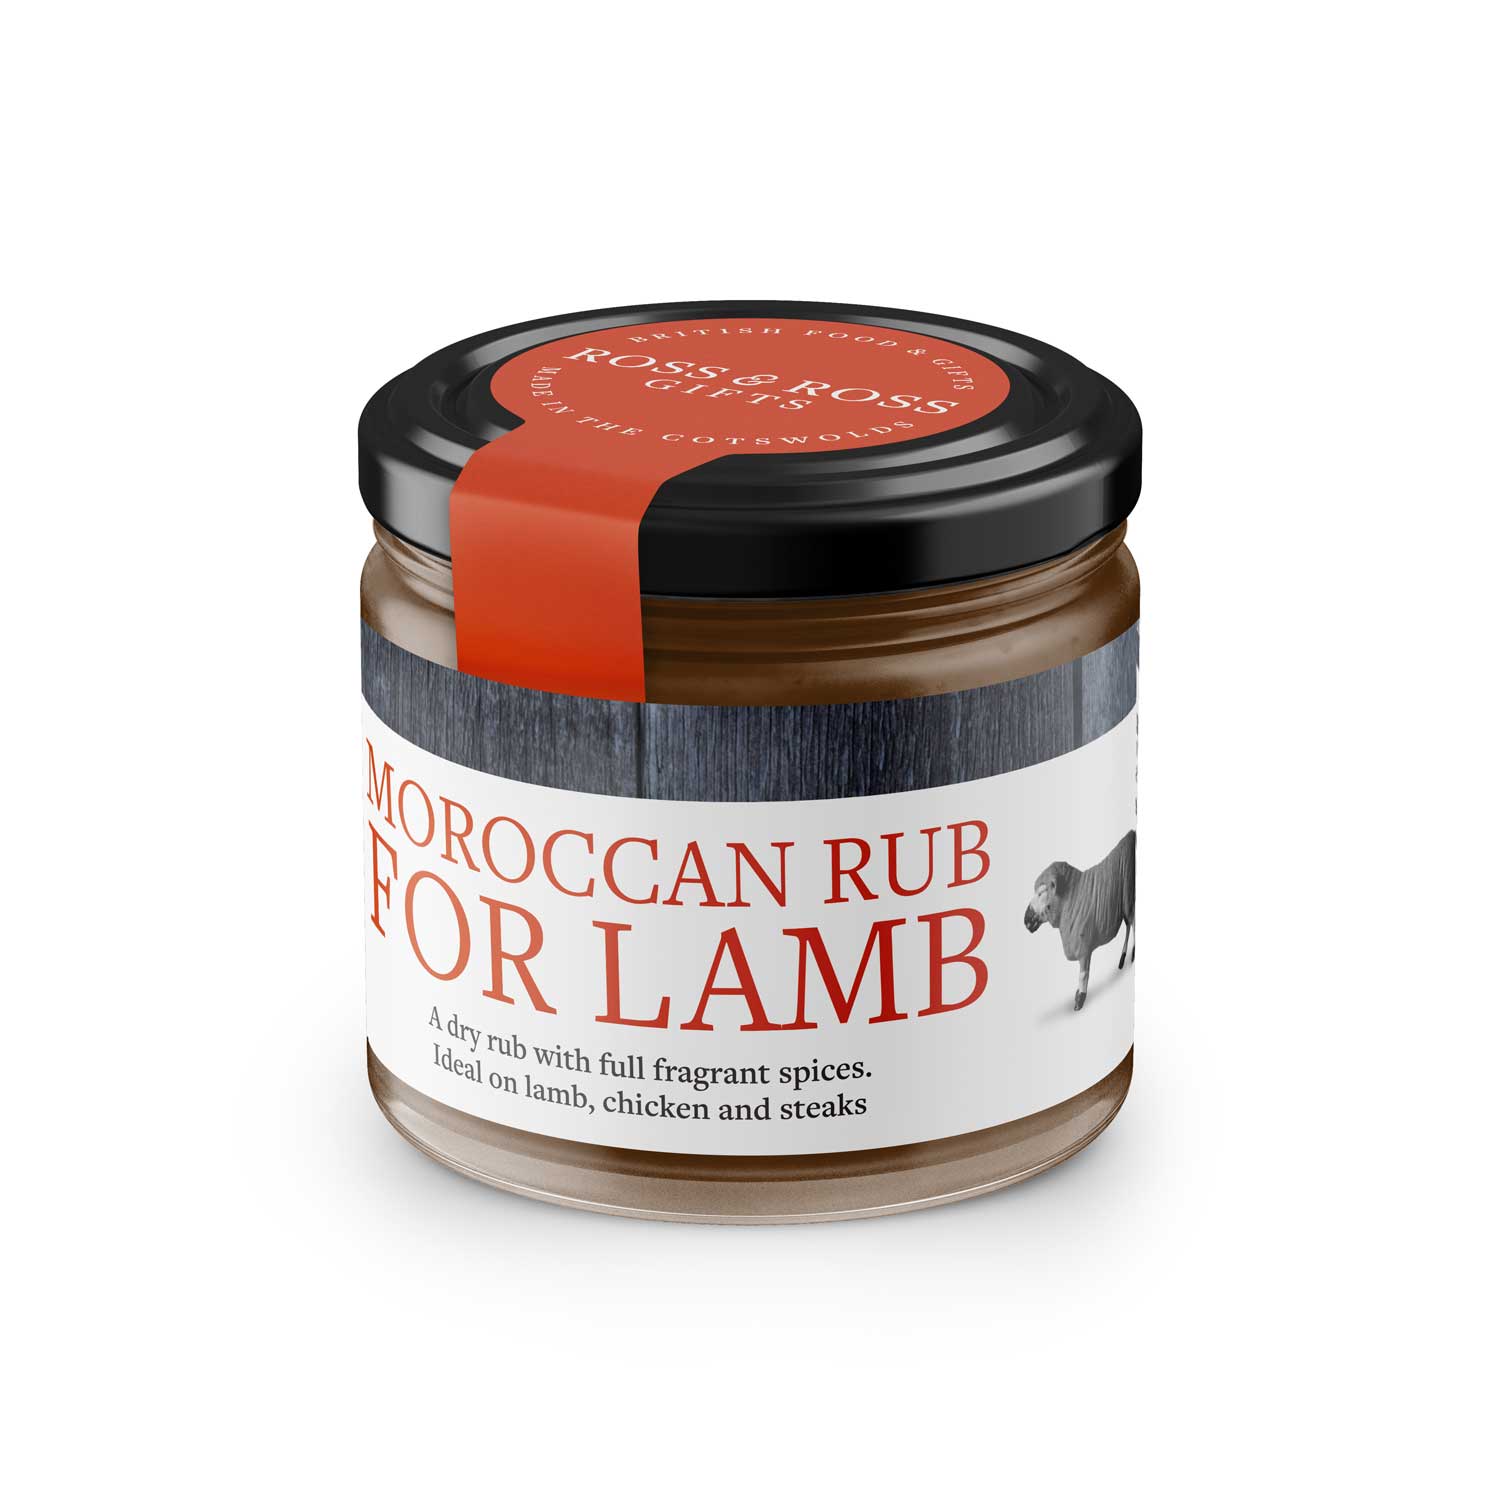 Moroccan Rub for Lamb by Ross and Ross - The Pop Up Deli